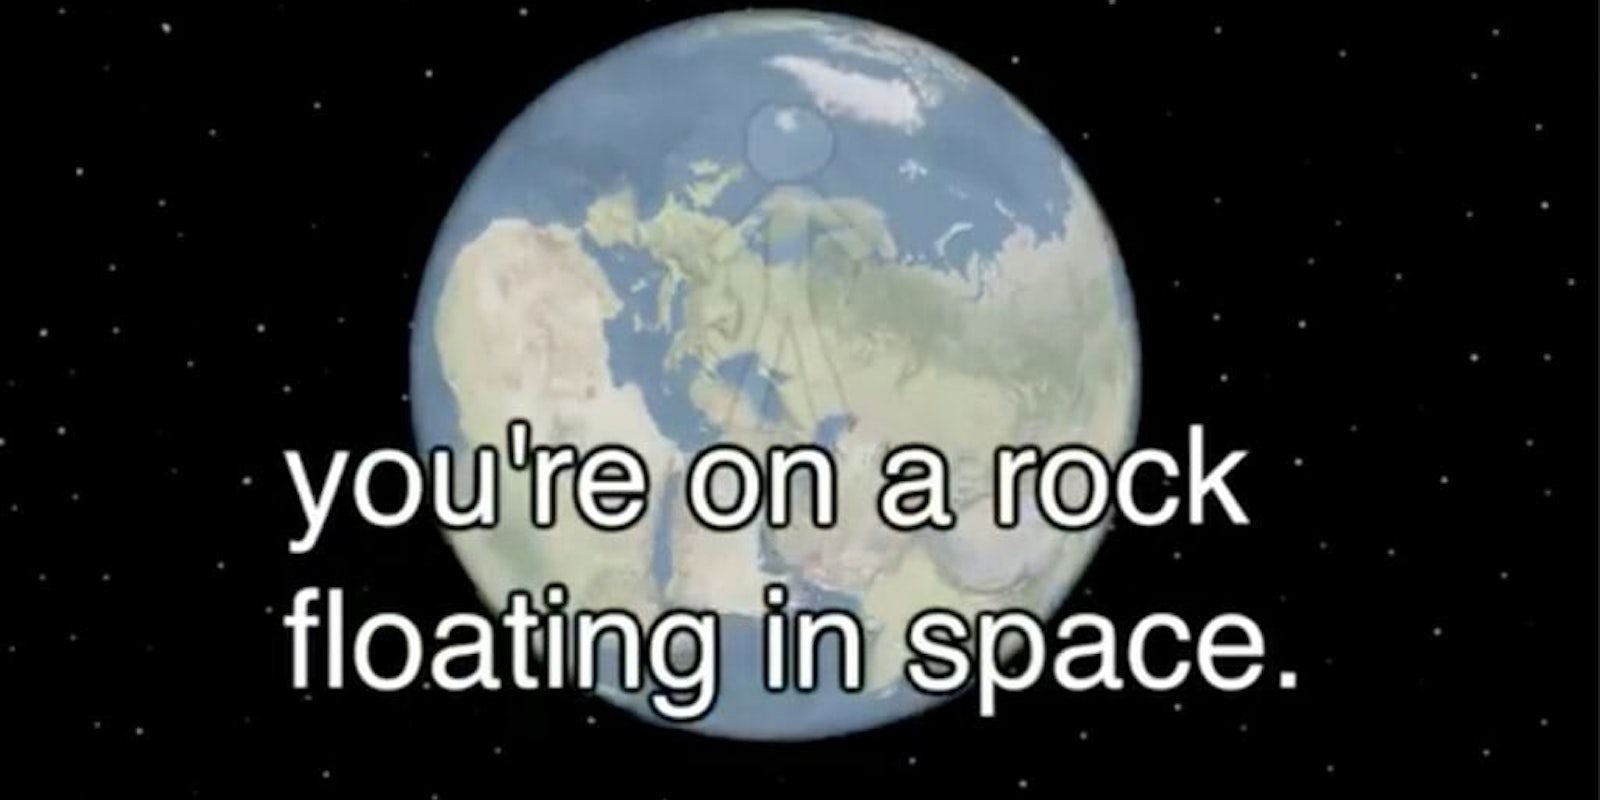 history of the entire world meme : you're on a rock floating in space